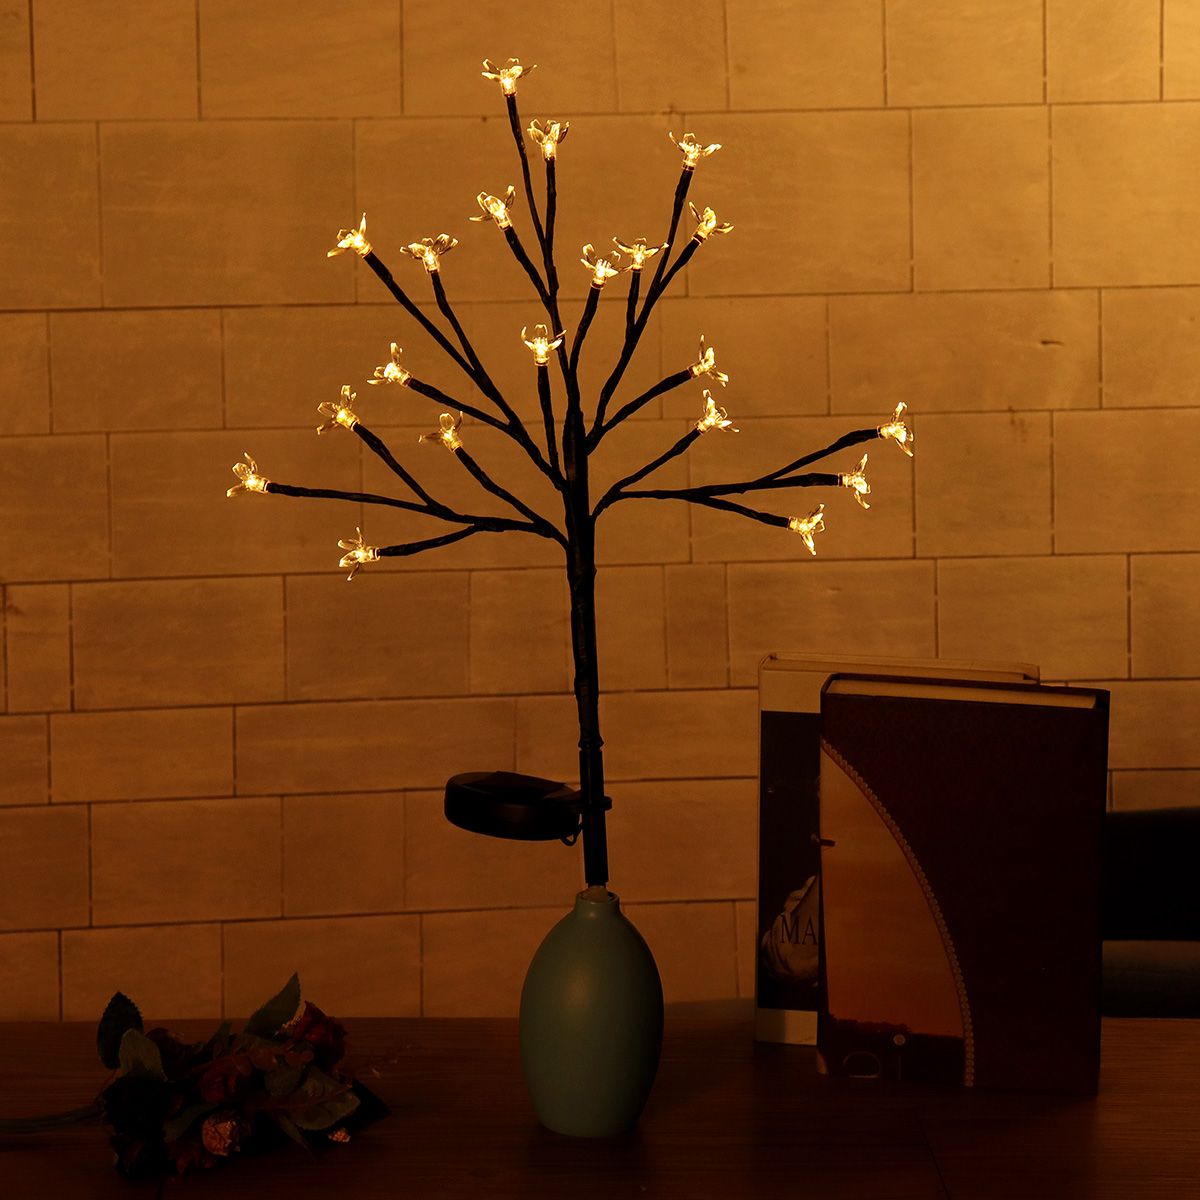 Solar-Powered-Cherry-Blossom-Tree-Branch-Outdoor-Waterproof-LED-String-Holiday-Light-for-Patio-Decor-1458477